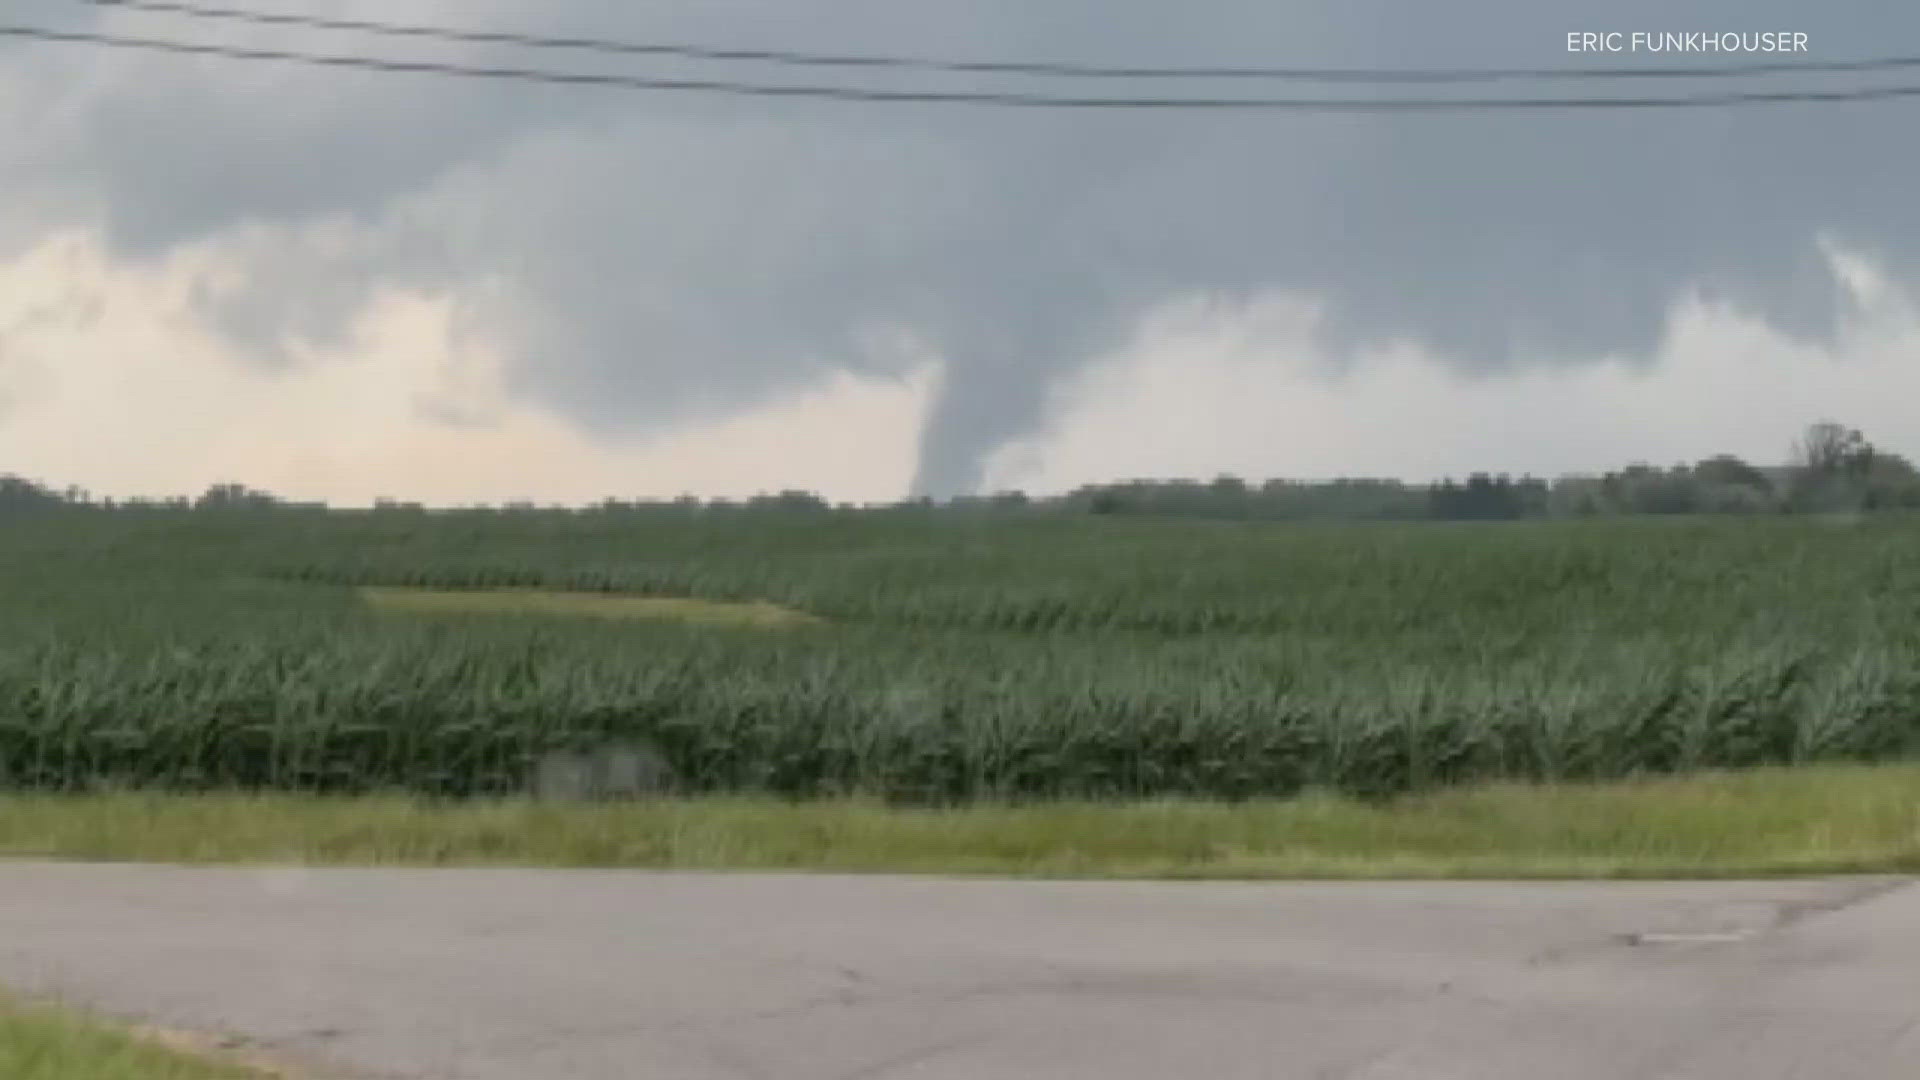 One year ago today, an E-F-2 tornado ripped through parts of Johnson County leaving a "miles long" path of destruction.